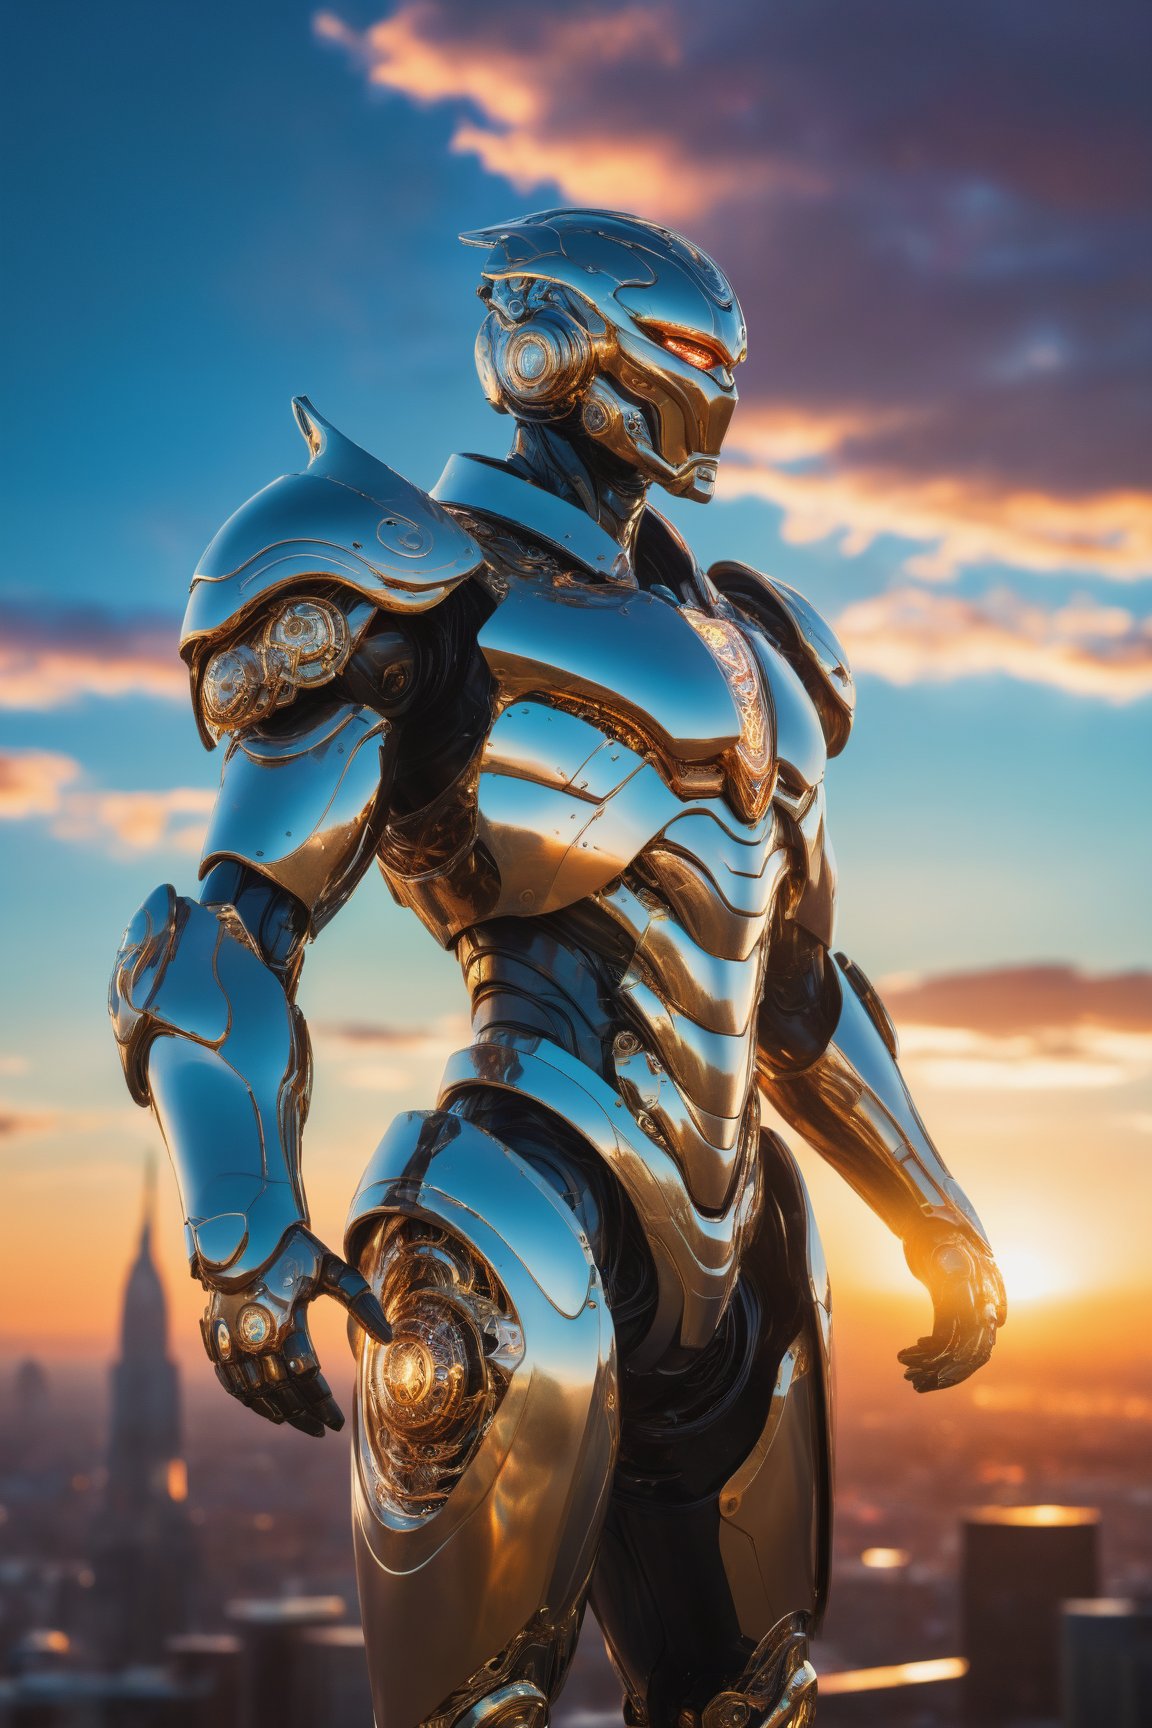 A majestic SteelHeartQuiron cyborg stands majestically against a gradient sunset sky, where volumetric lighting casts an otherworldly glow. In the foreground, the subject's delicate features are rendered in exquisite detail, as if painted by Jean Baptiste Mongue himself. Intricately detailed fluid gouache textures dance across their synthetic skin, while calligraphic strokes adorn their cybernetic enhancements. Marton Bobzert's maximalist photoillustration expertise brings forth an 8k resolution masterpiece, where the subject's elegant pose and expansive presence command the viewer's attention. In the background, a cityscape sprawls in intricate detail, bathed in natural lighting that complements the artificial luminescence of the cyborg's mechanical components.